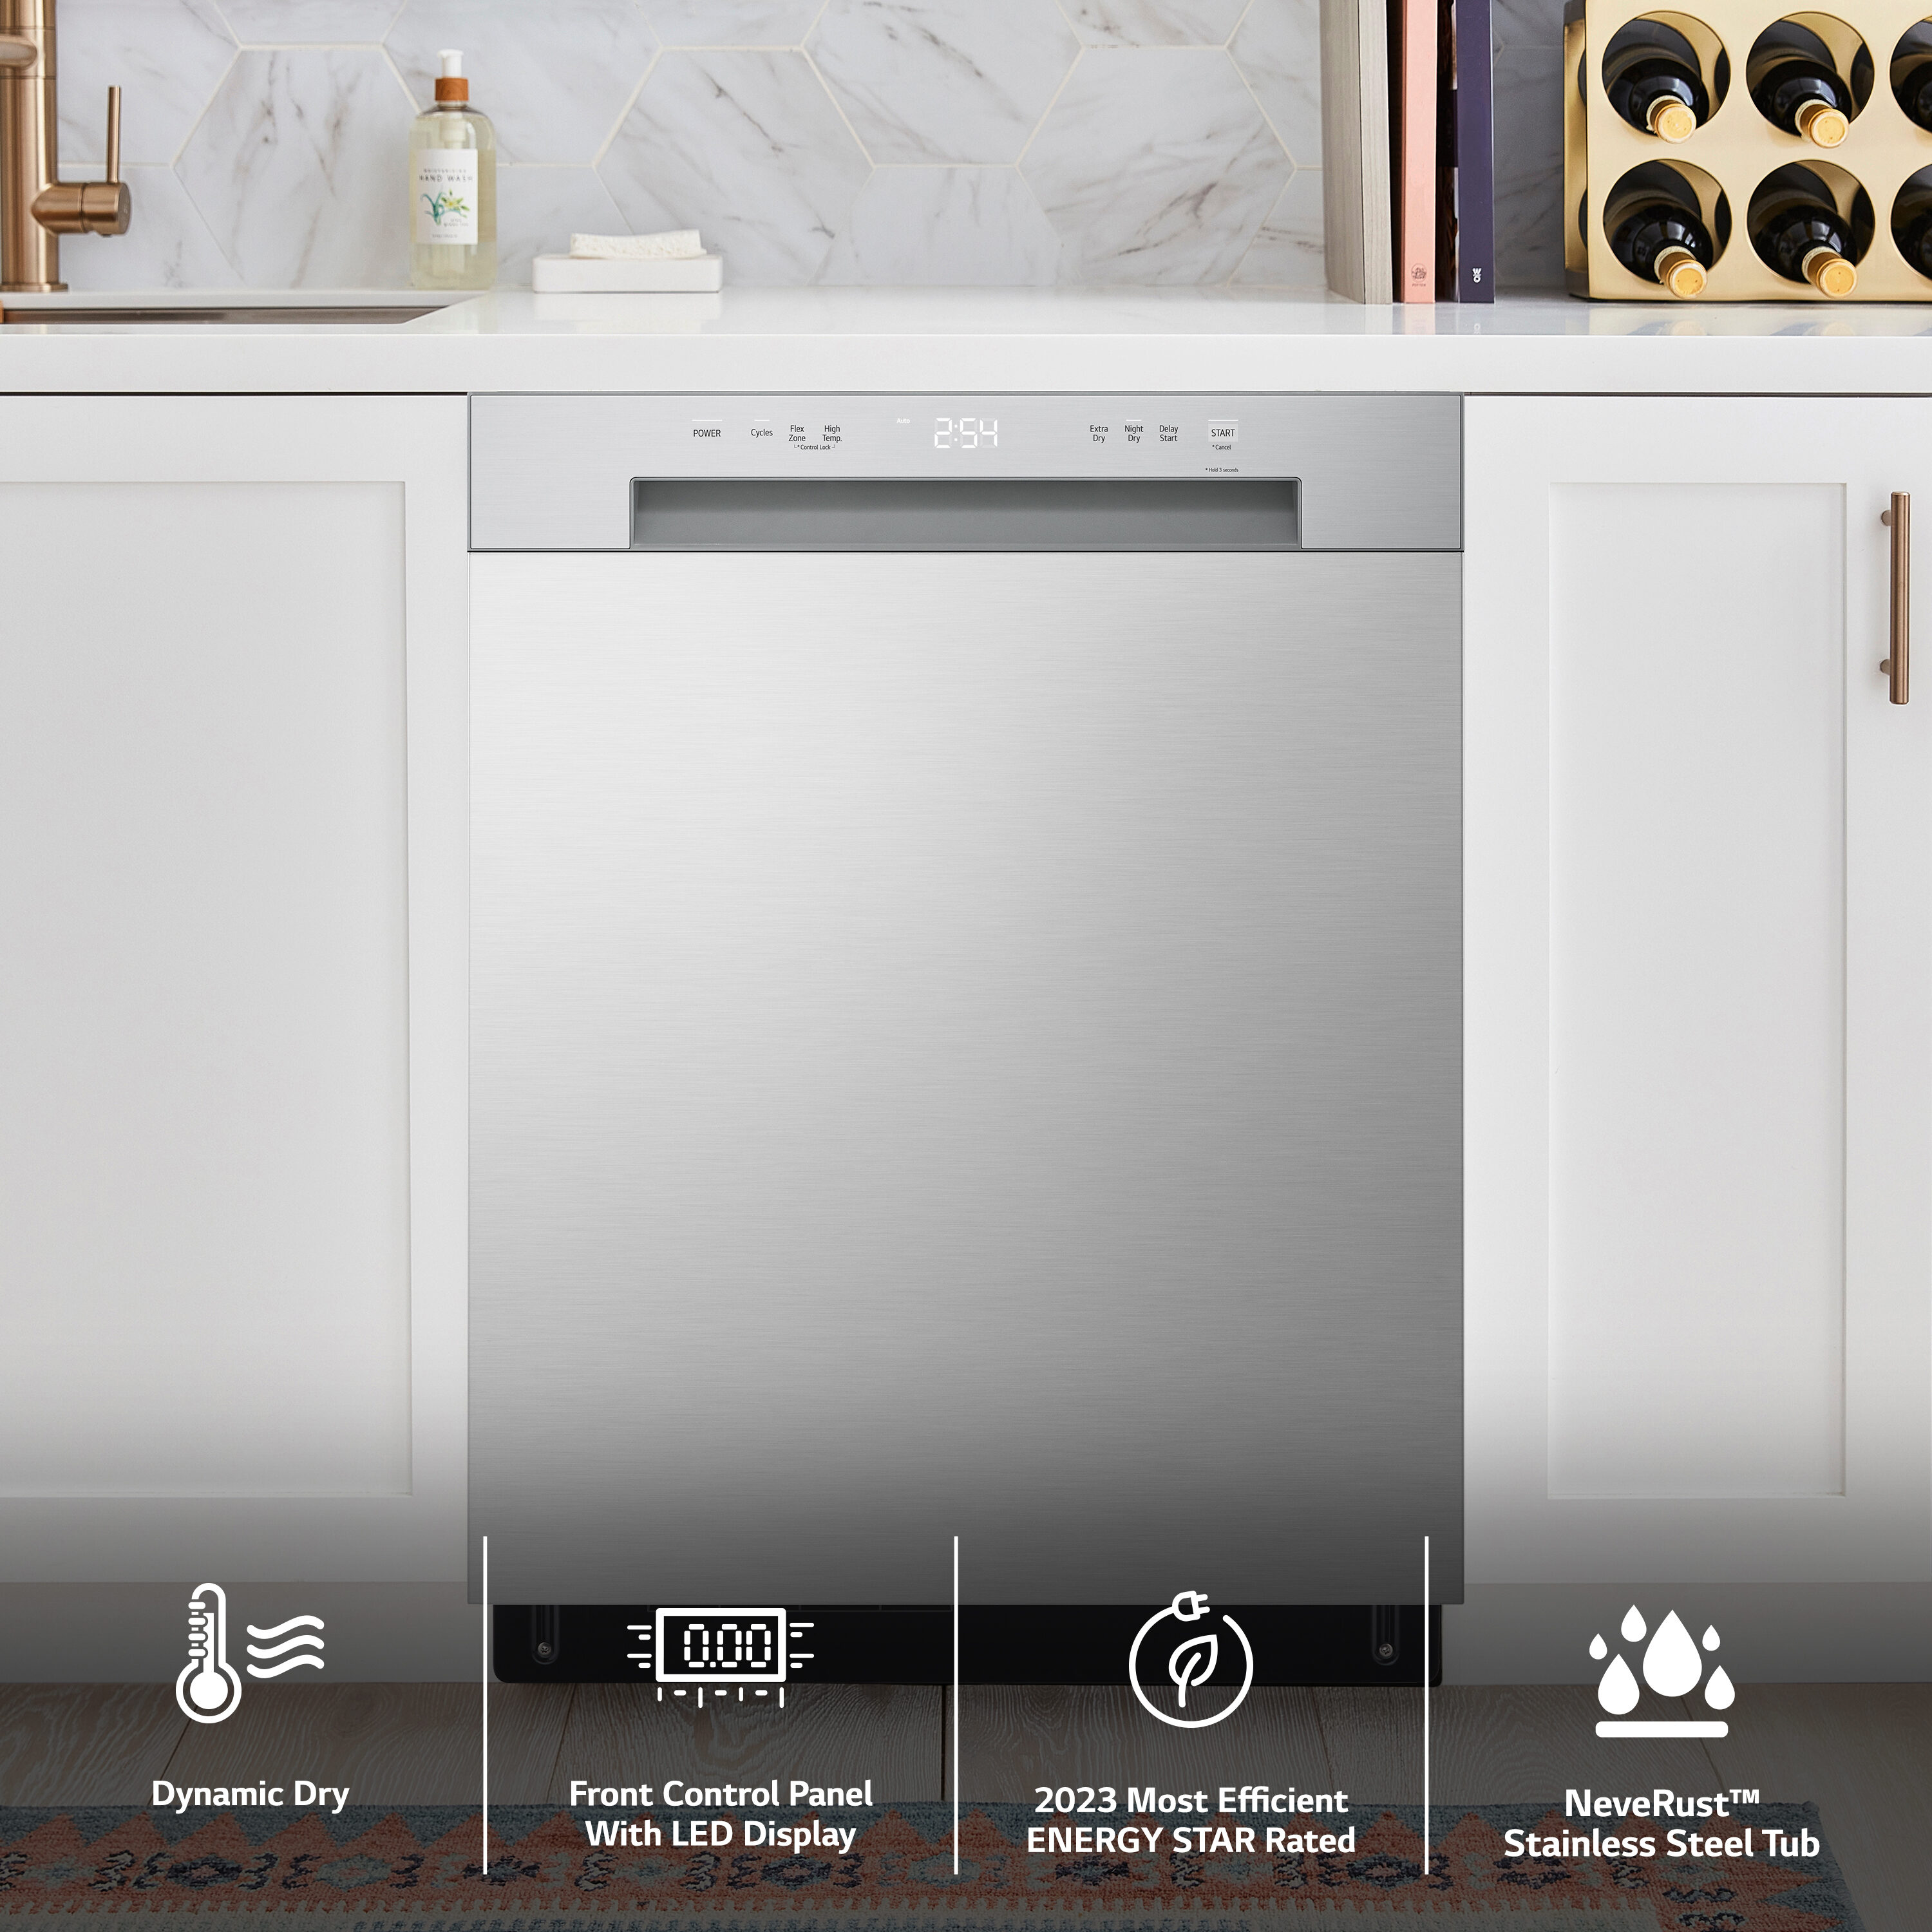 Samsung Front Control 24-in Built-In Dishwasher (Stainless Steel) ENERGY  STAR, 52-dBA in the Built-In Dishwashers department at